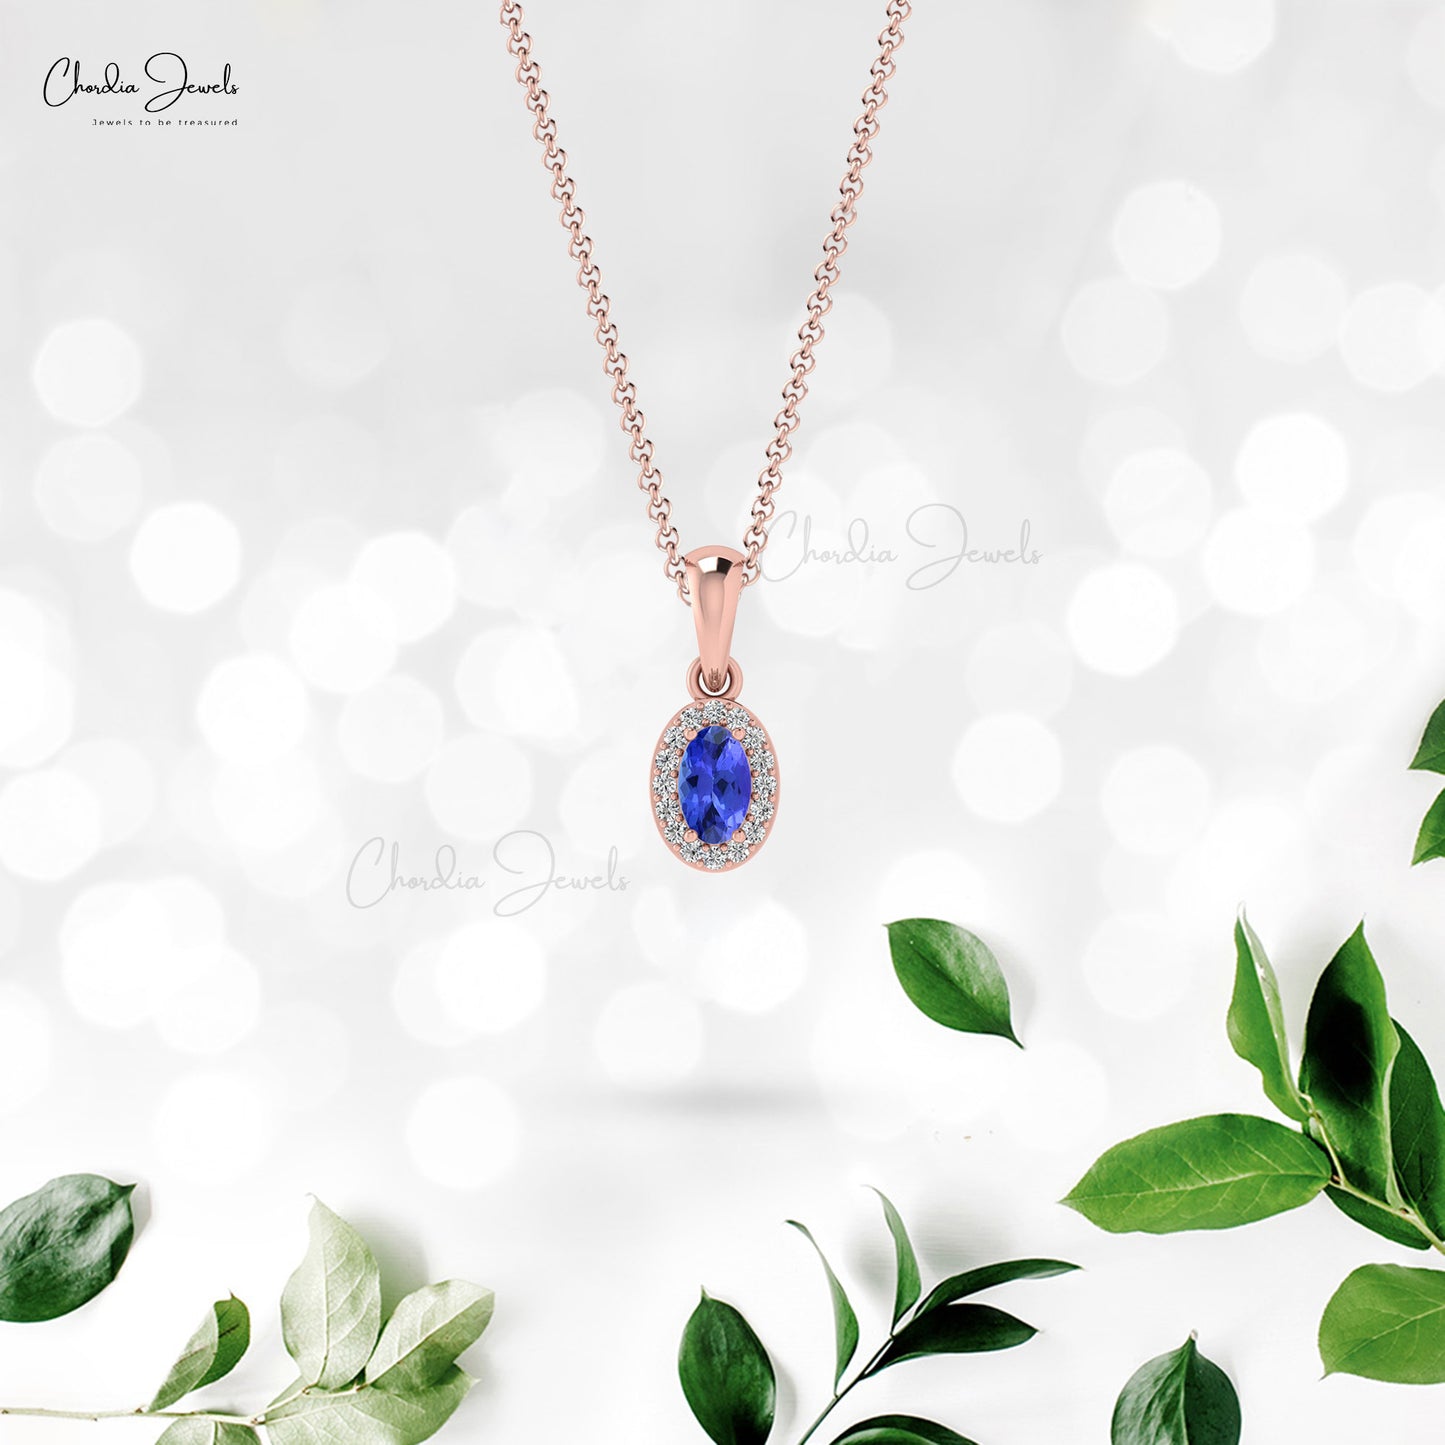 Luxury Women Simple Round Cut Diamond Halo Pendant Necklace Natural Tanzanite Gemstone Pendant in 14k Pure Gold Valentine's Day Gift For Love Ones